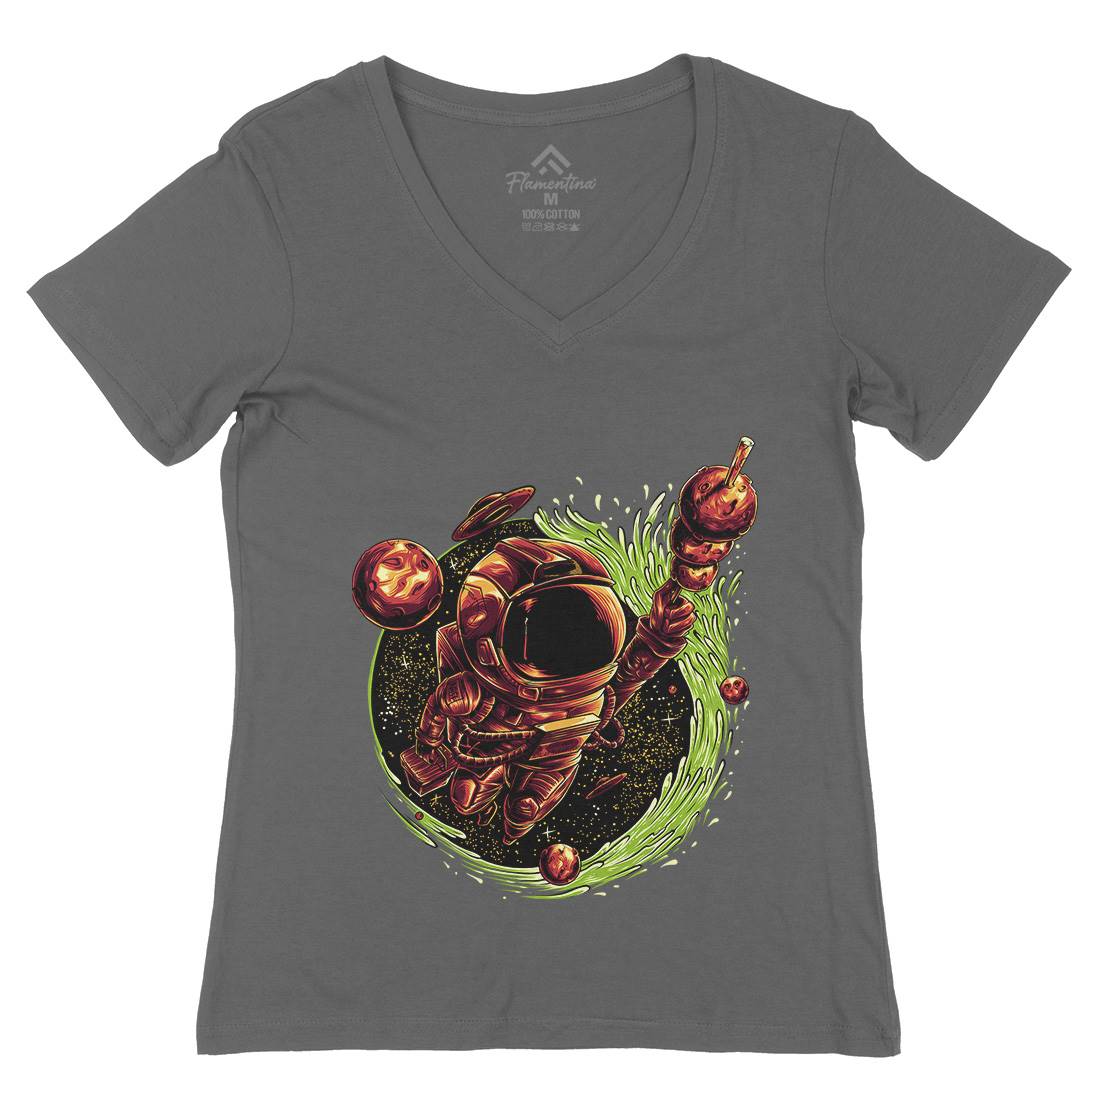 Grilled Meatball Womens Organic V-Neck T-Shirt Space D037